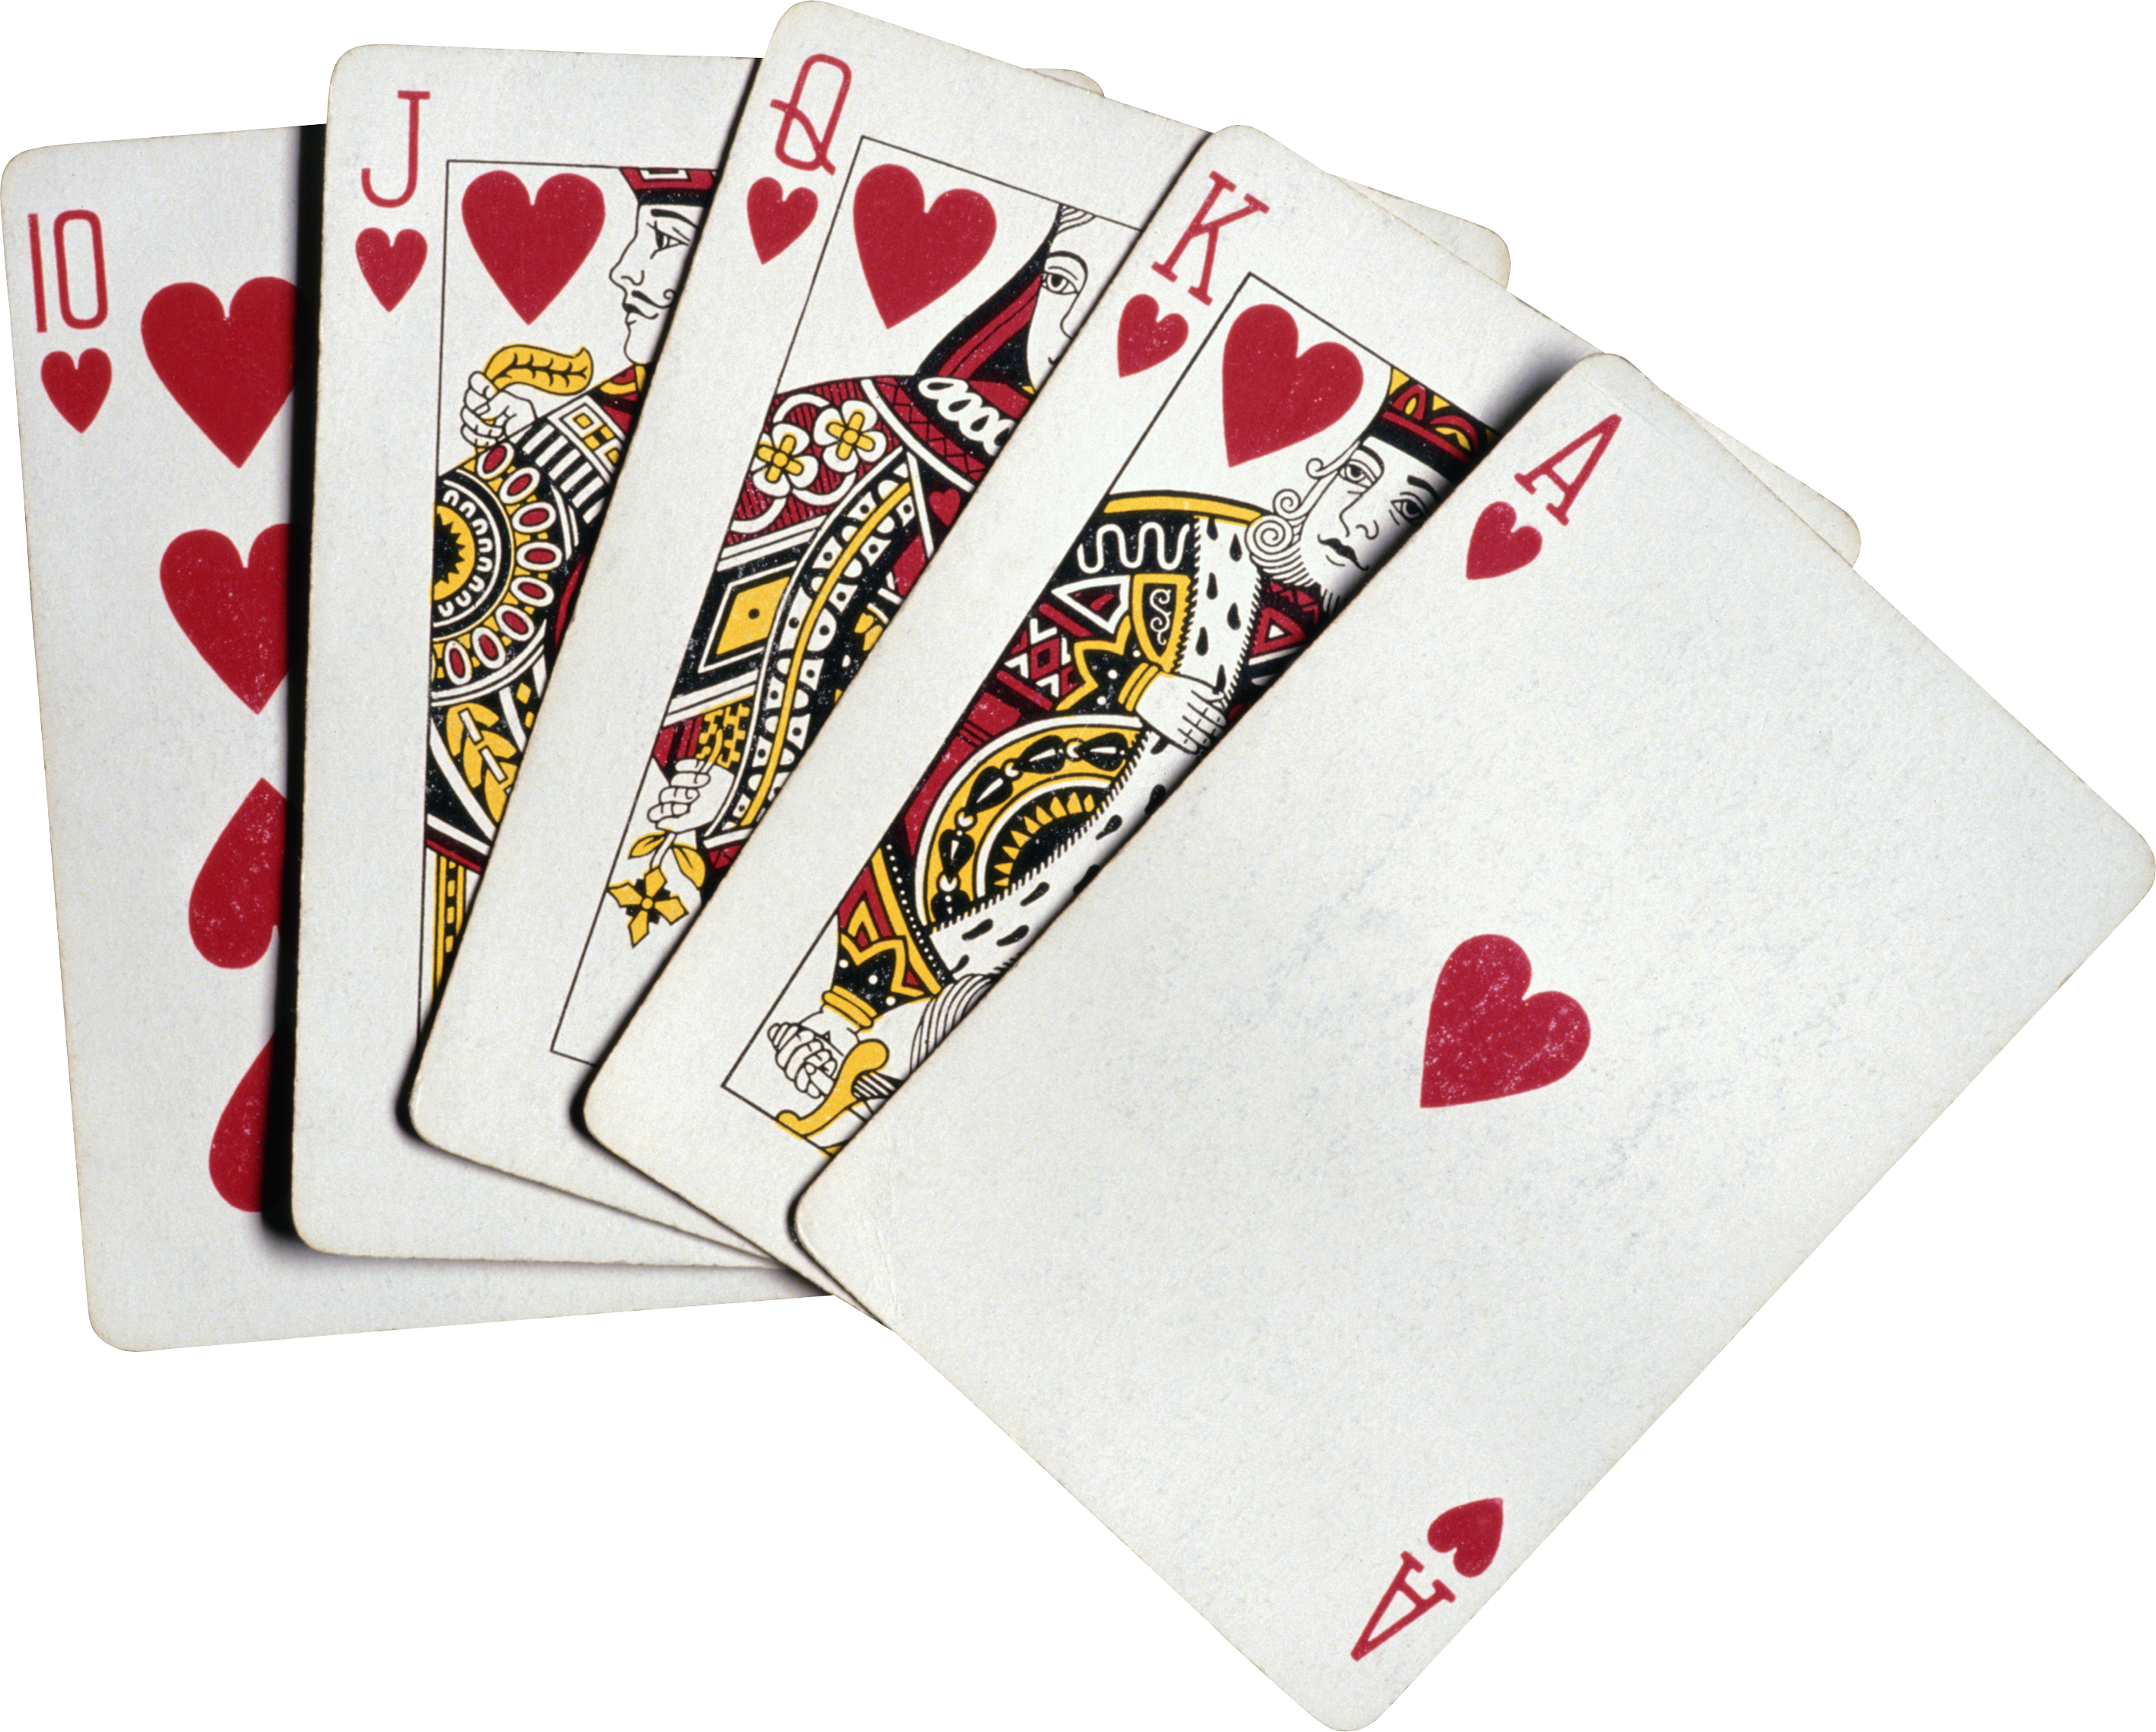 Cards PNG images free download, png card image.